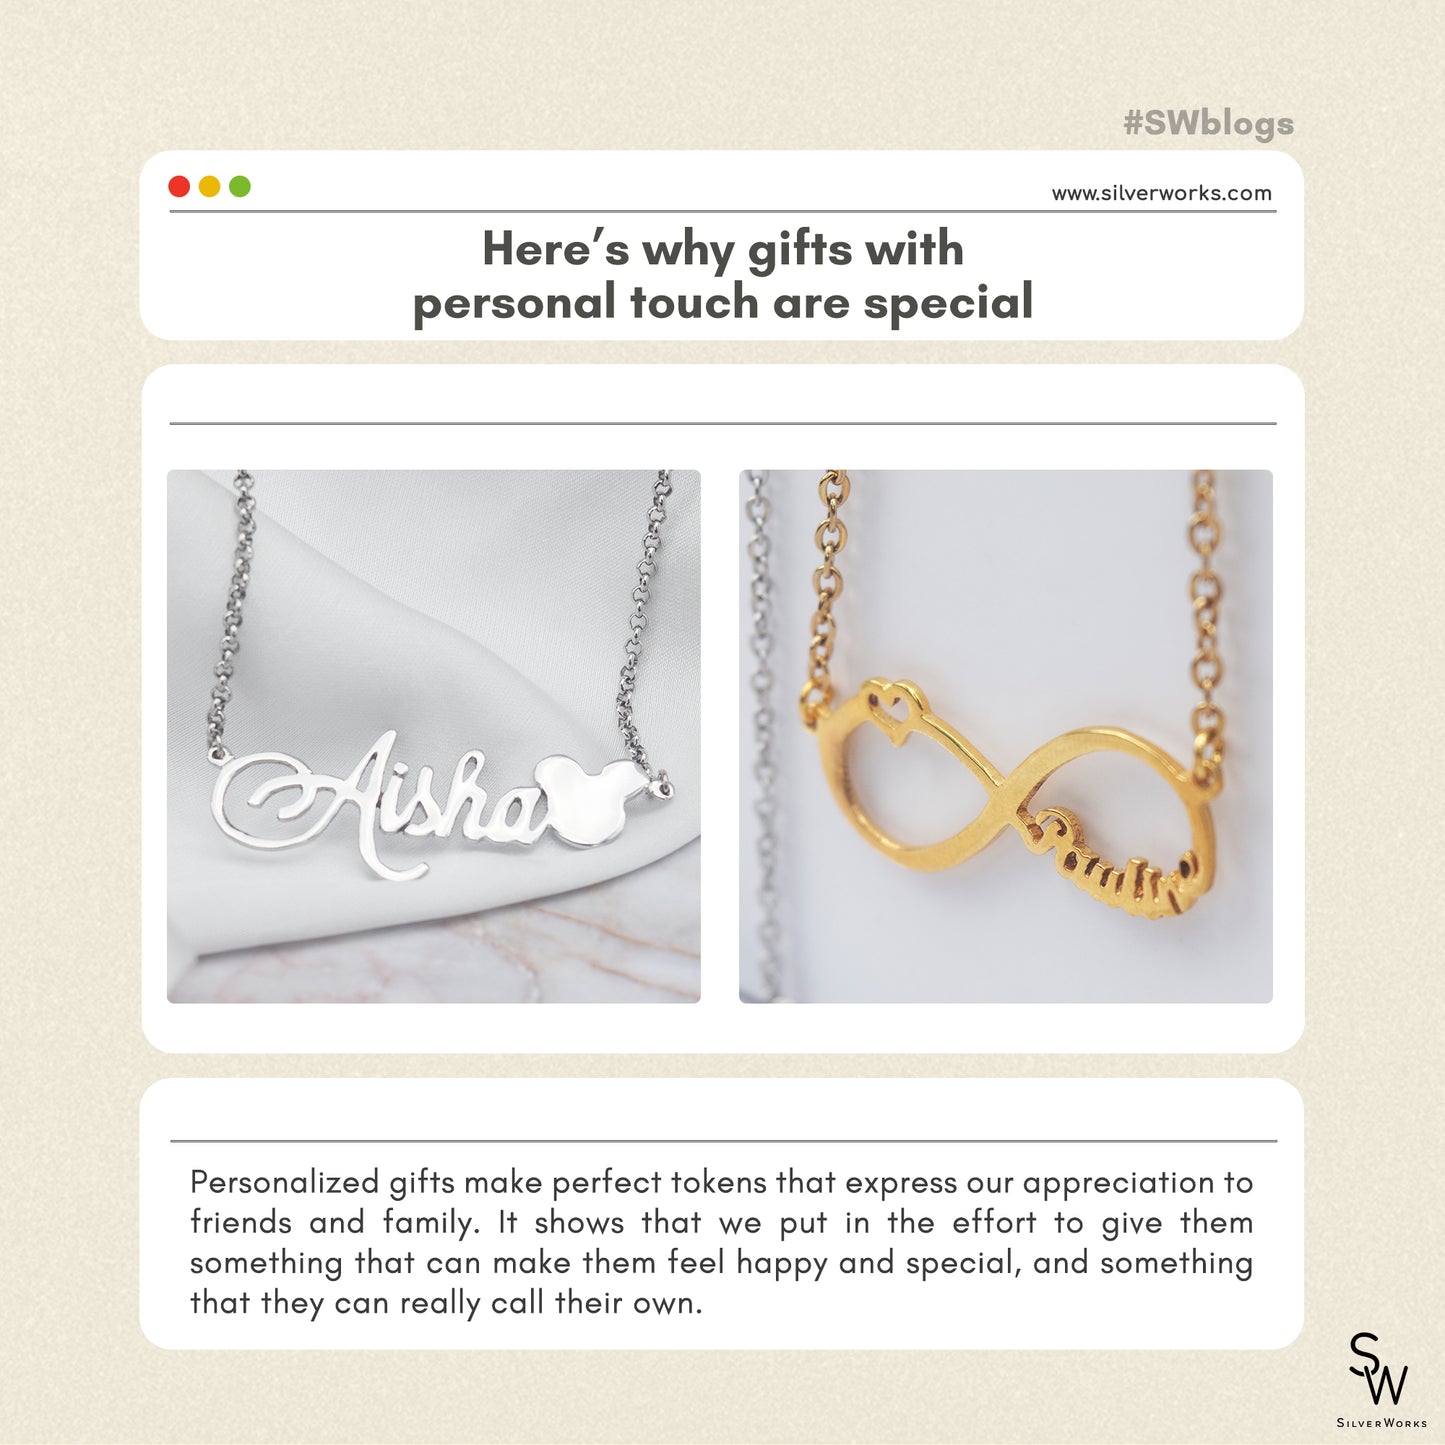 WHY GIFTING IS SPECIAL WHEN IT’S PERSONALIZED